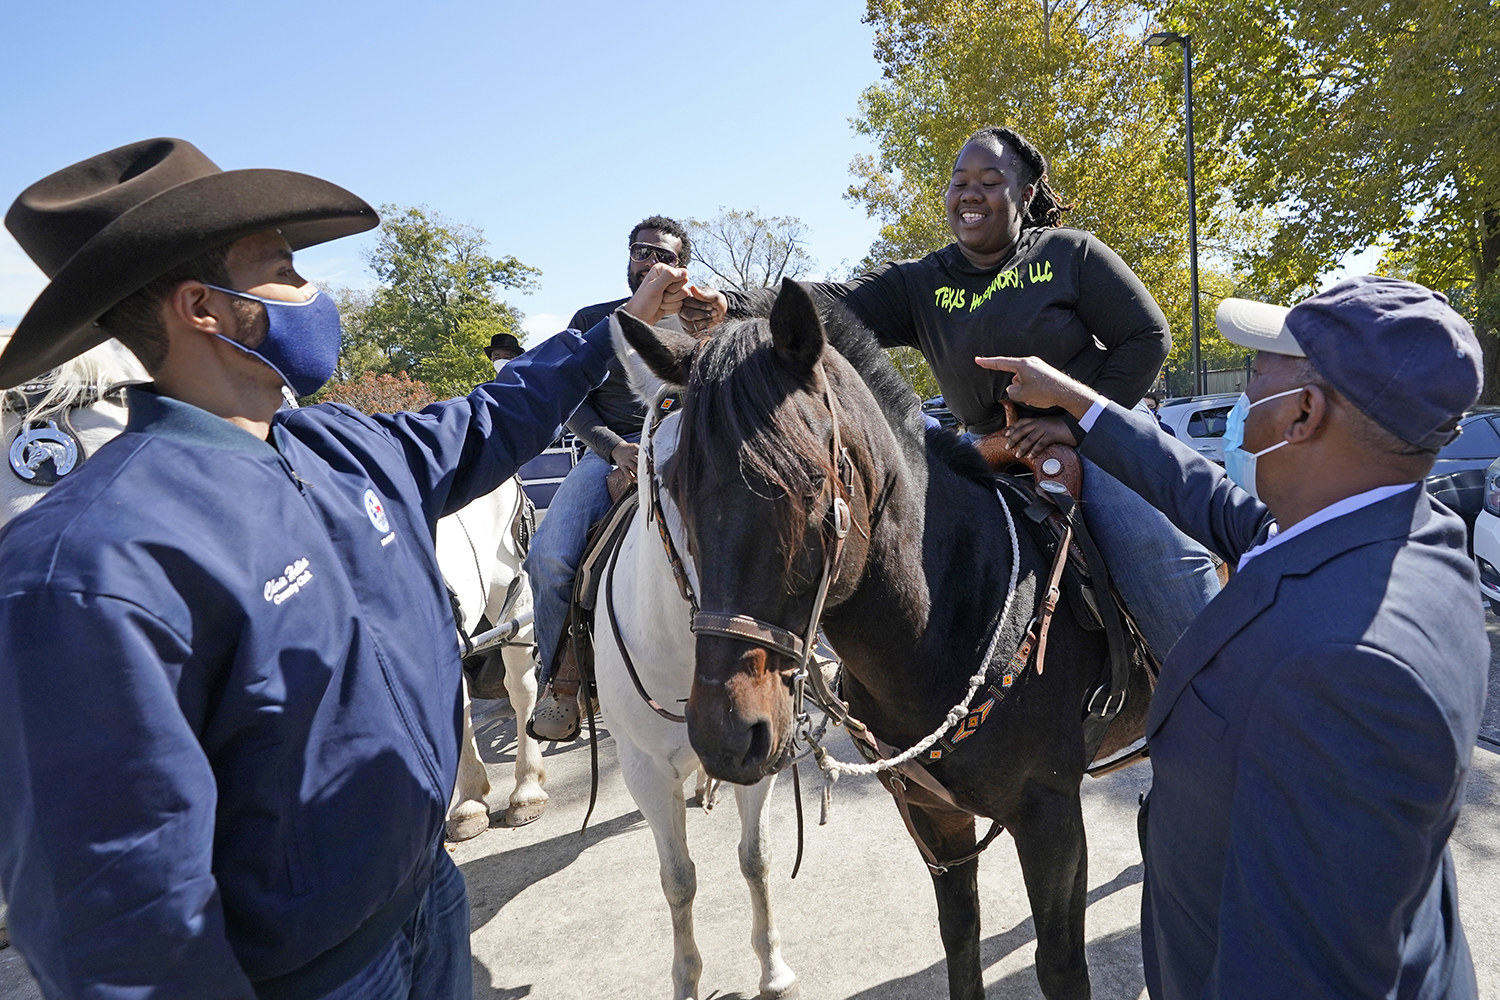 Two people on horseback fist bump with two men who are standing 